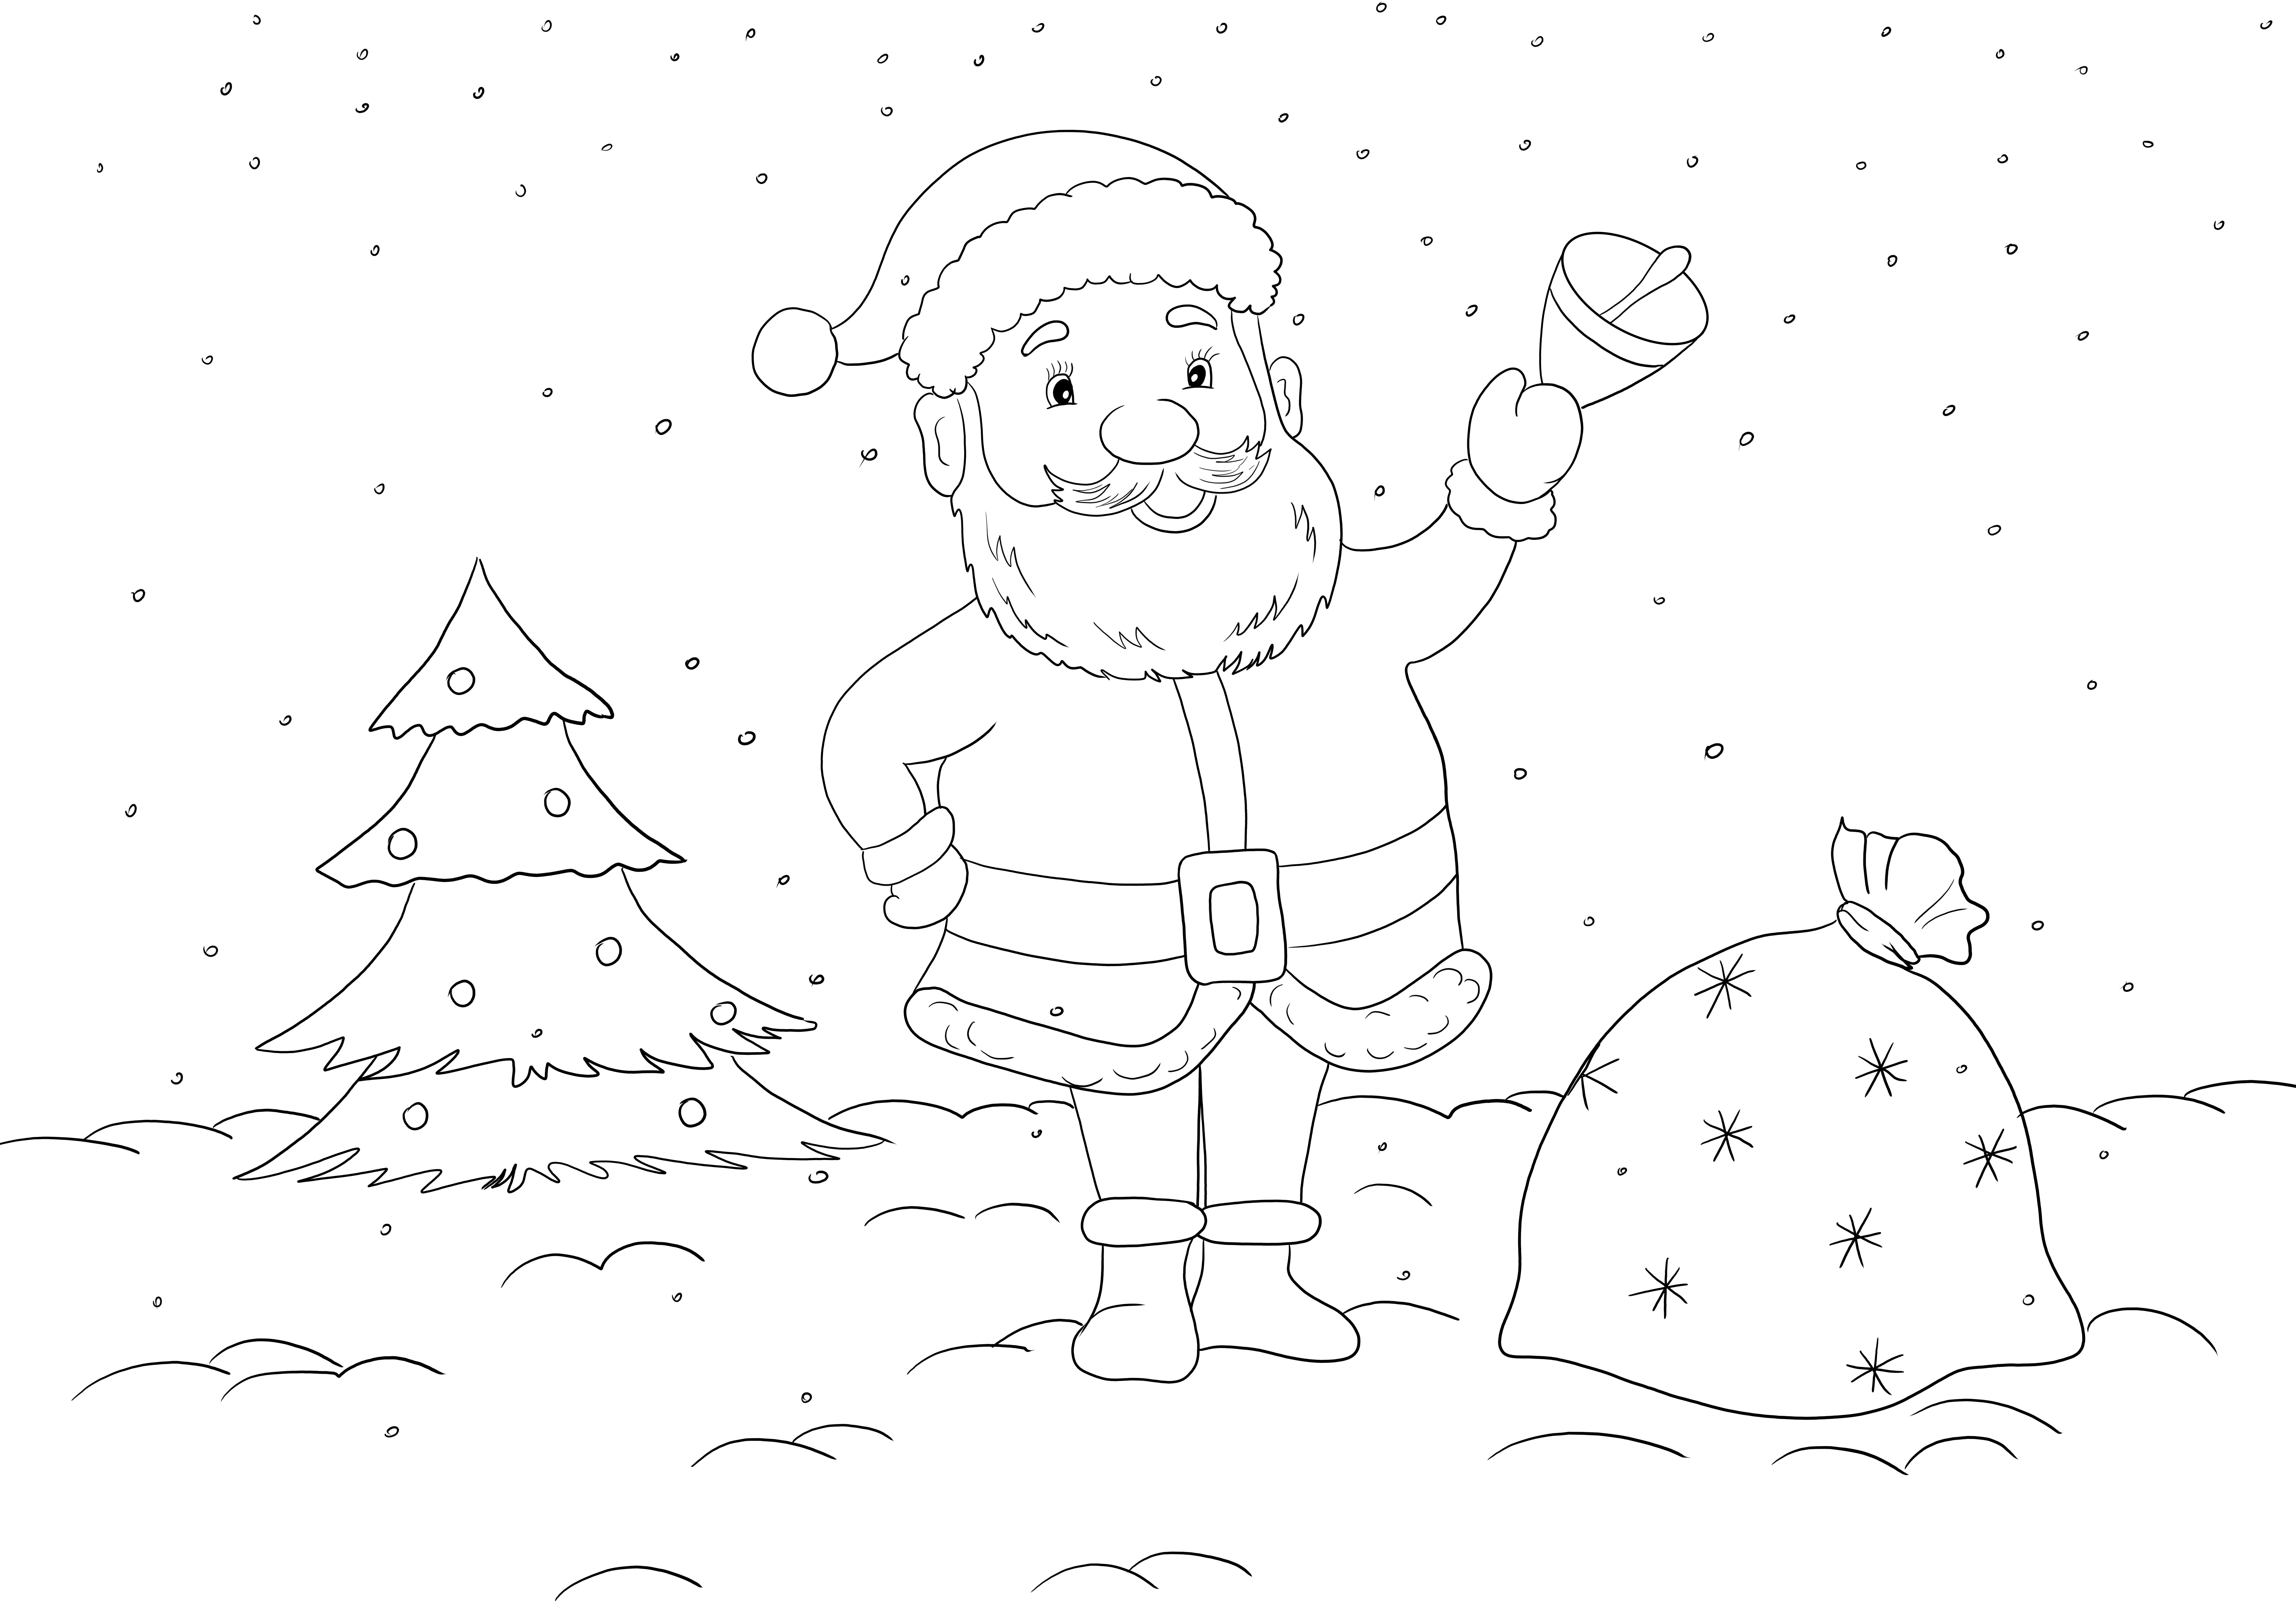 Our Santa is ringing the bell free printable sheet is waiting for kids